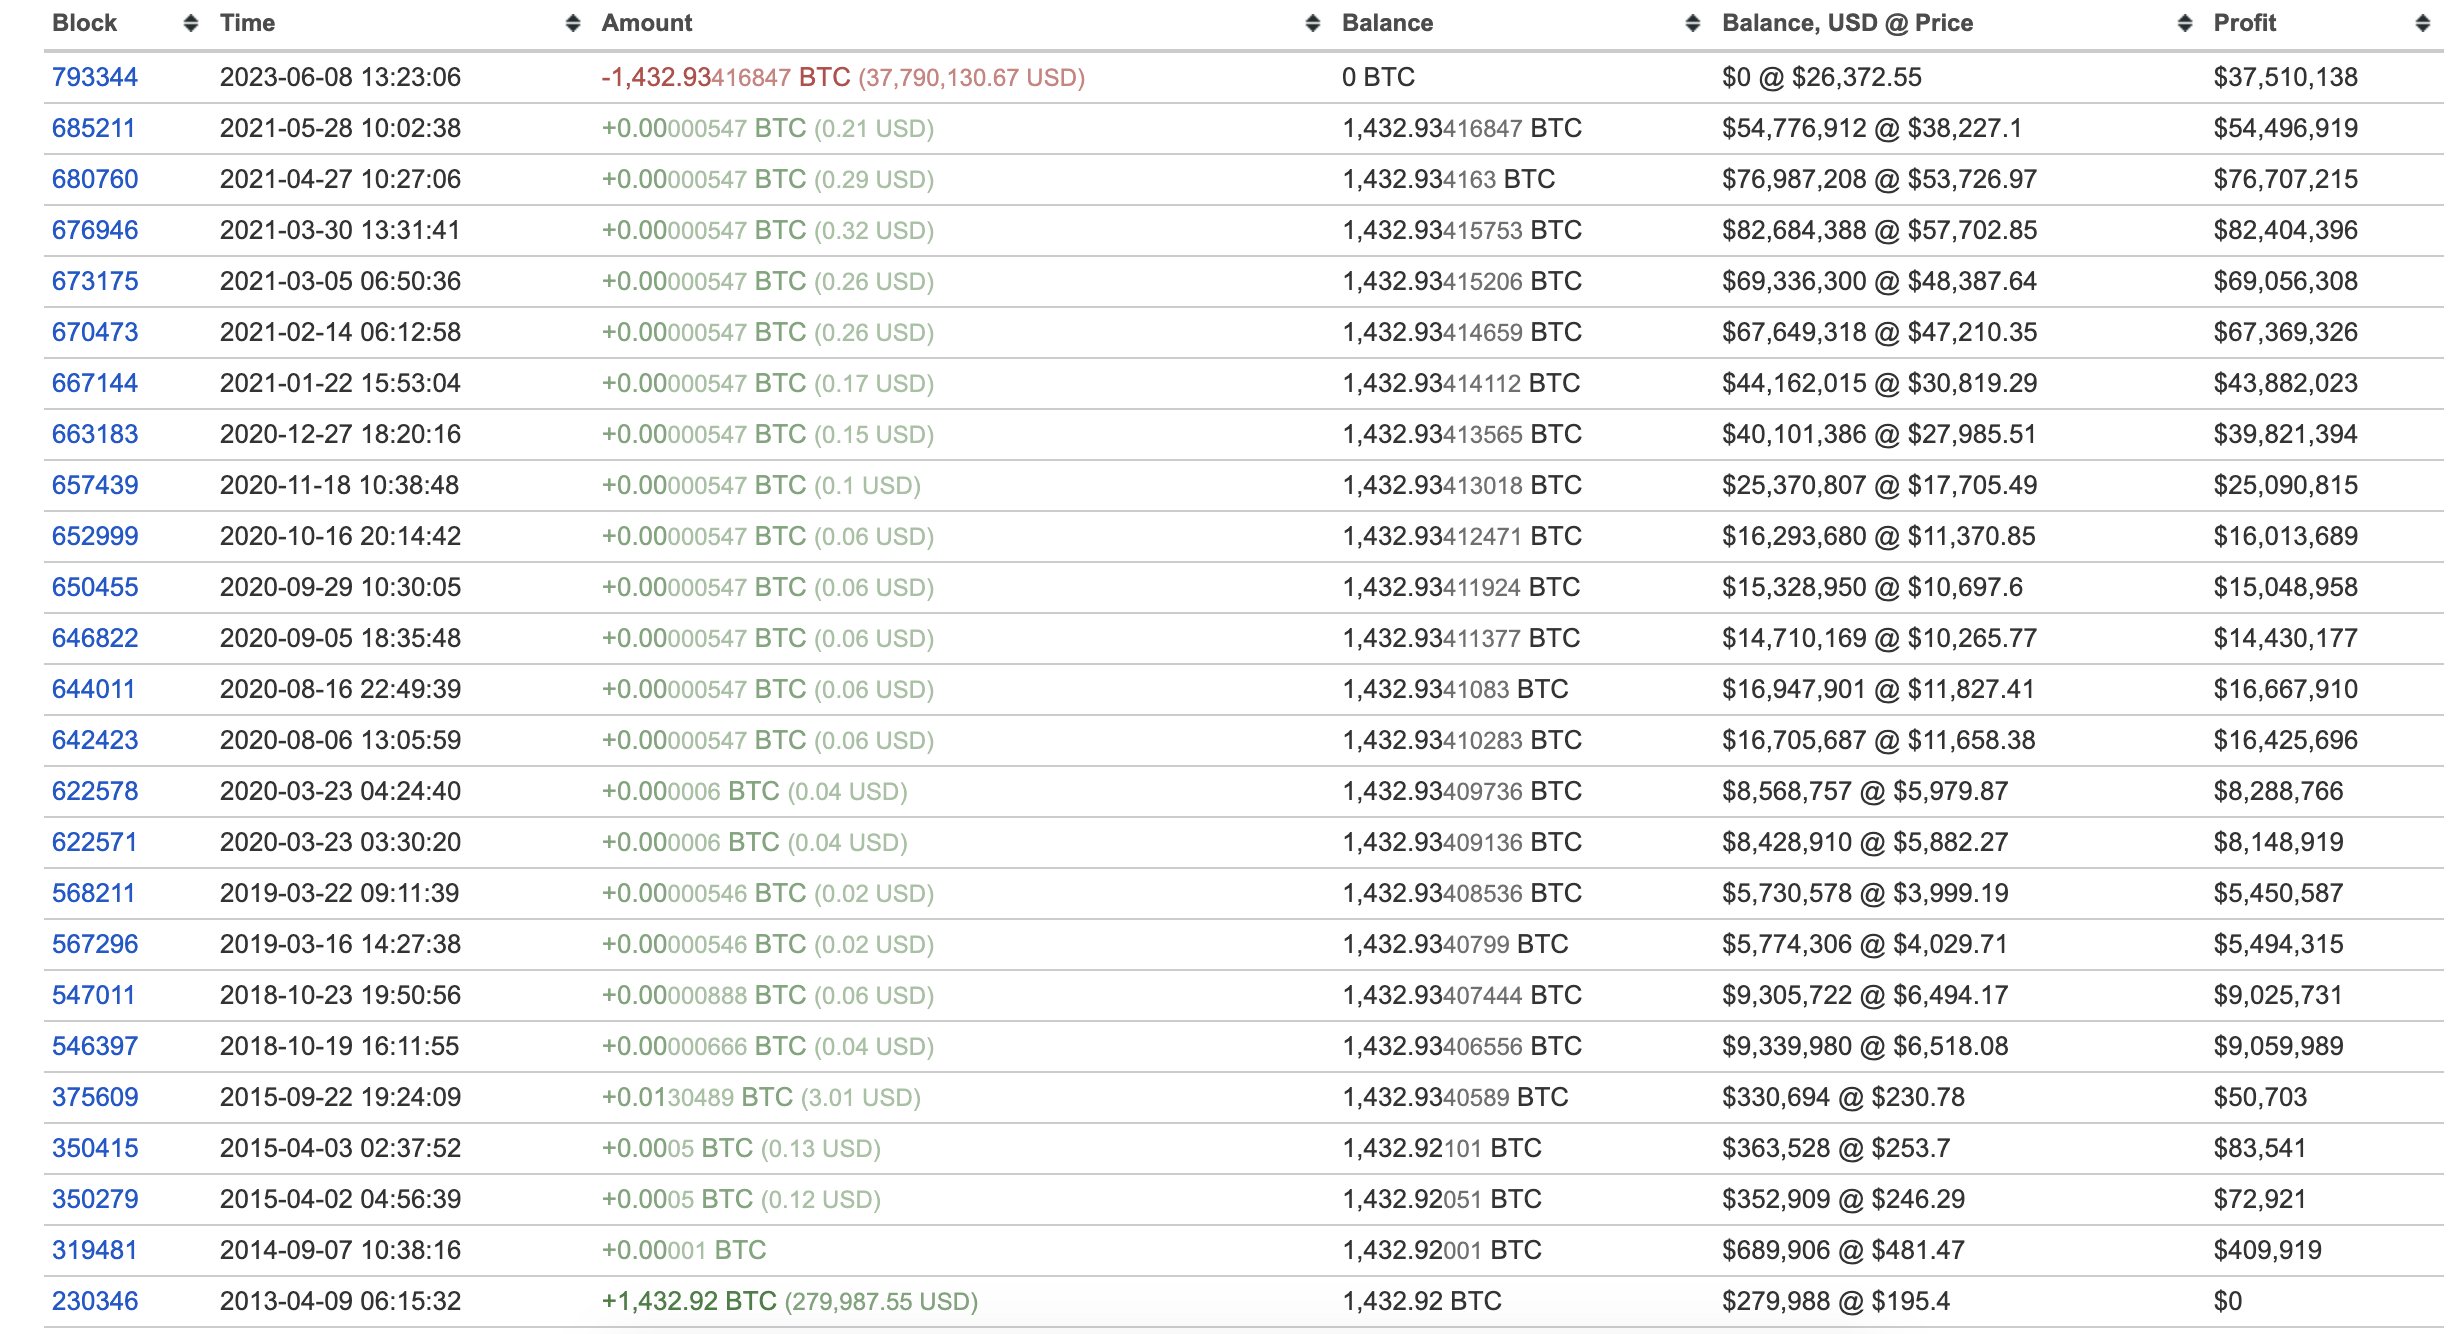 A screenshot of the transaction history of the whale